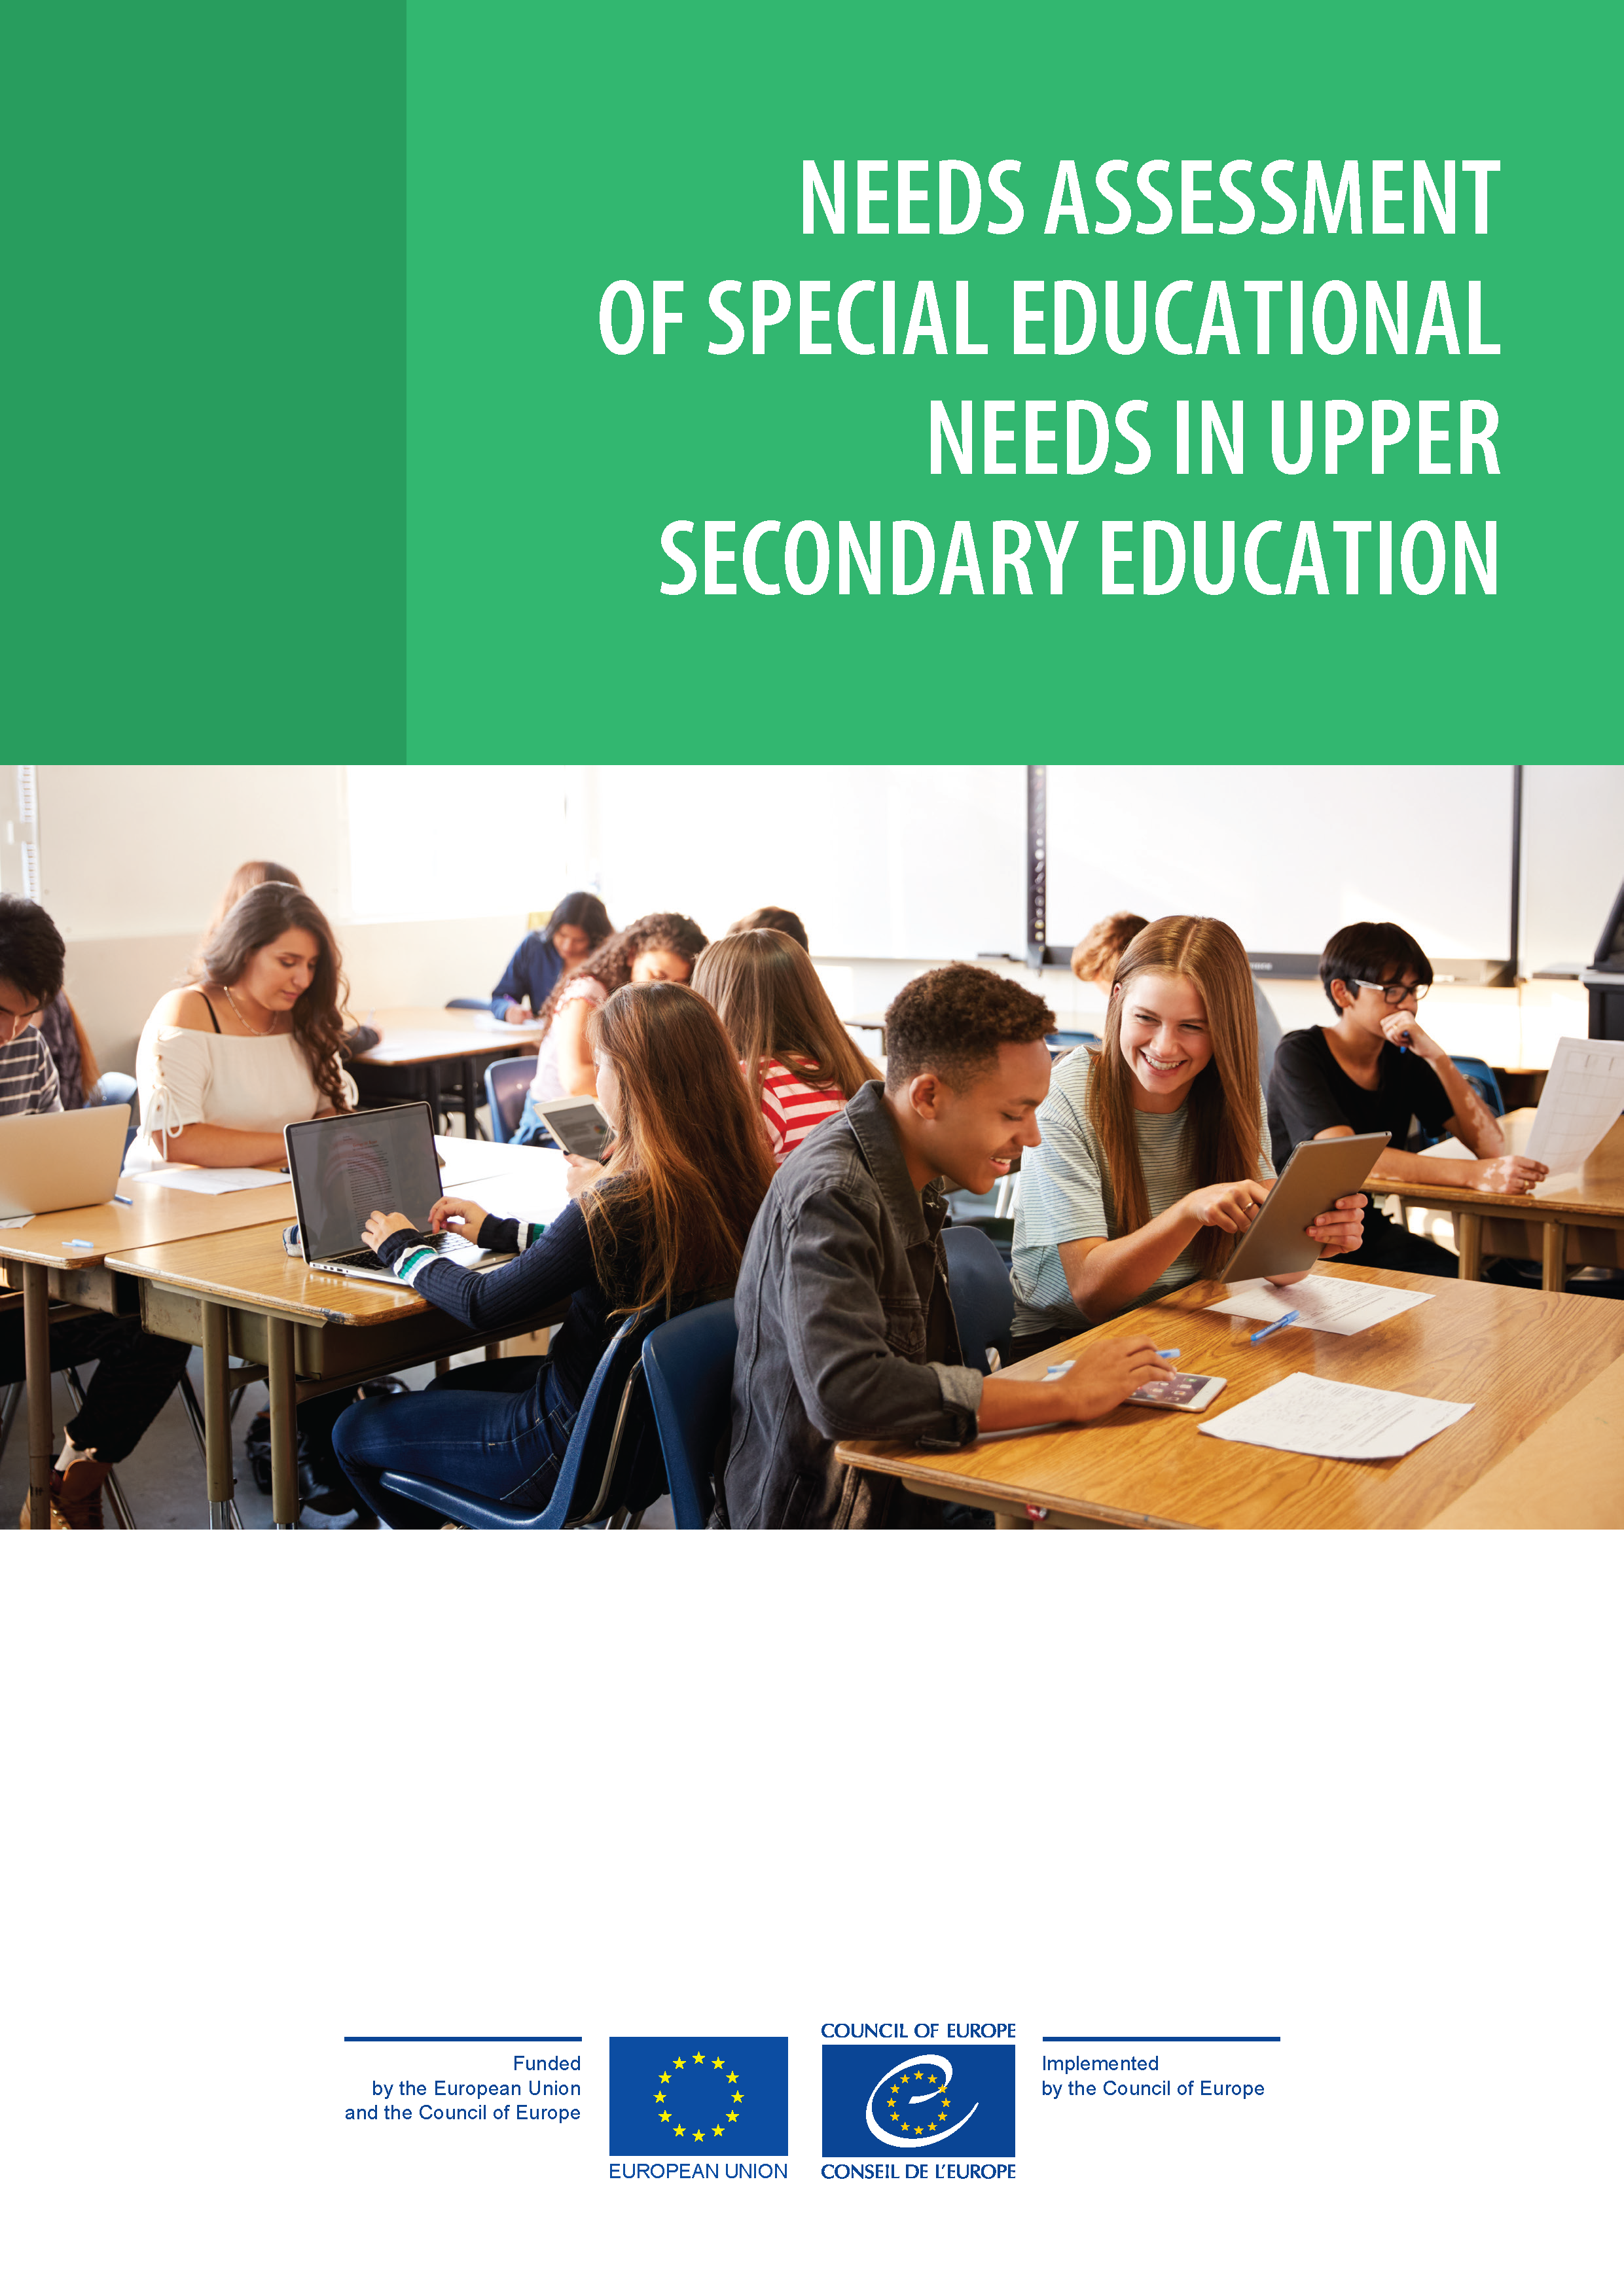 Needs Assessment of Special Educational Needs in Upper Secondary Education